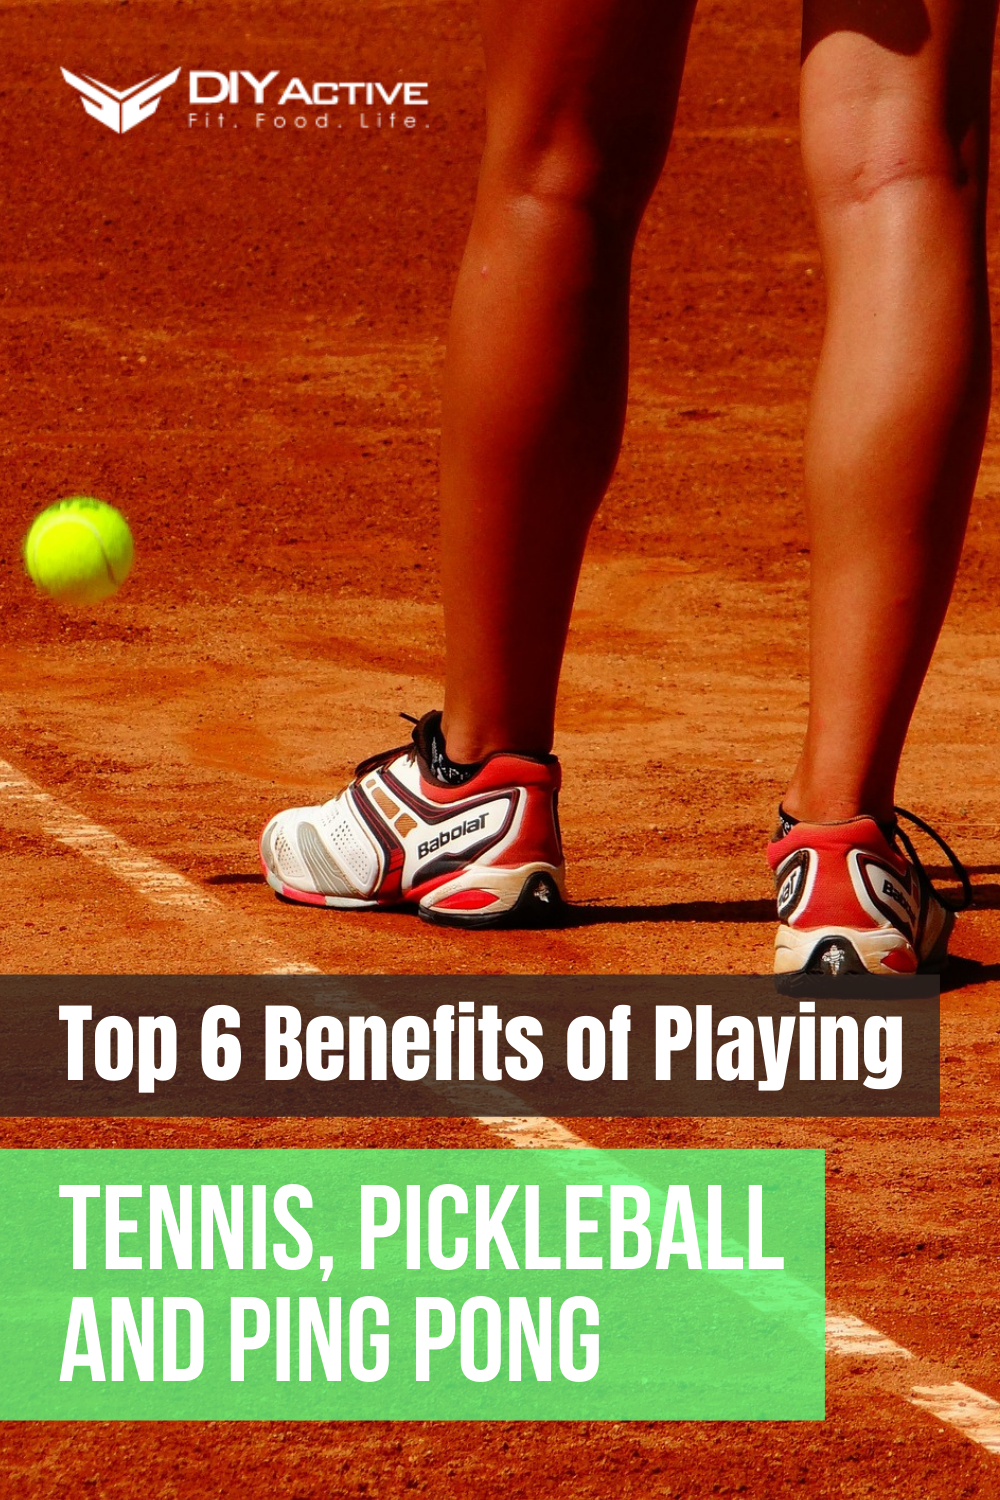 Top 6 Benefits of Playing Tennis, Pickleball and Ping Pong